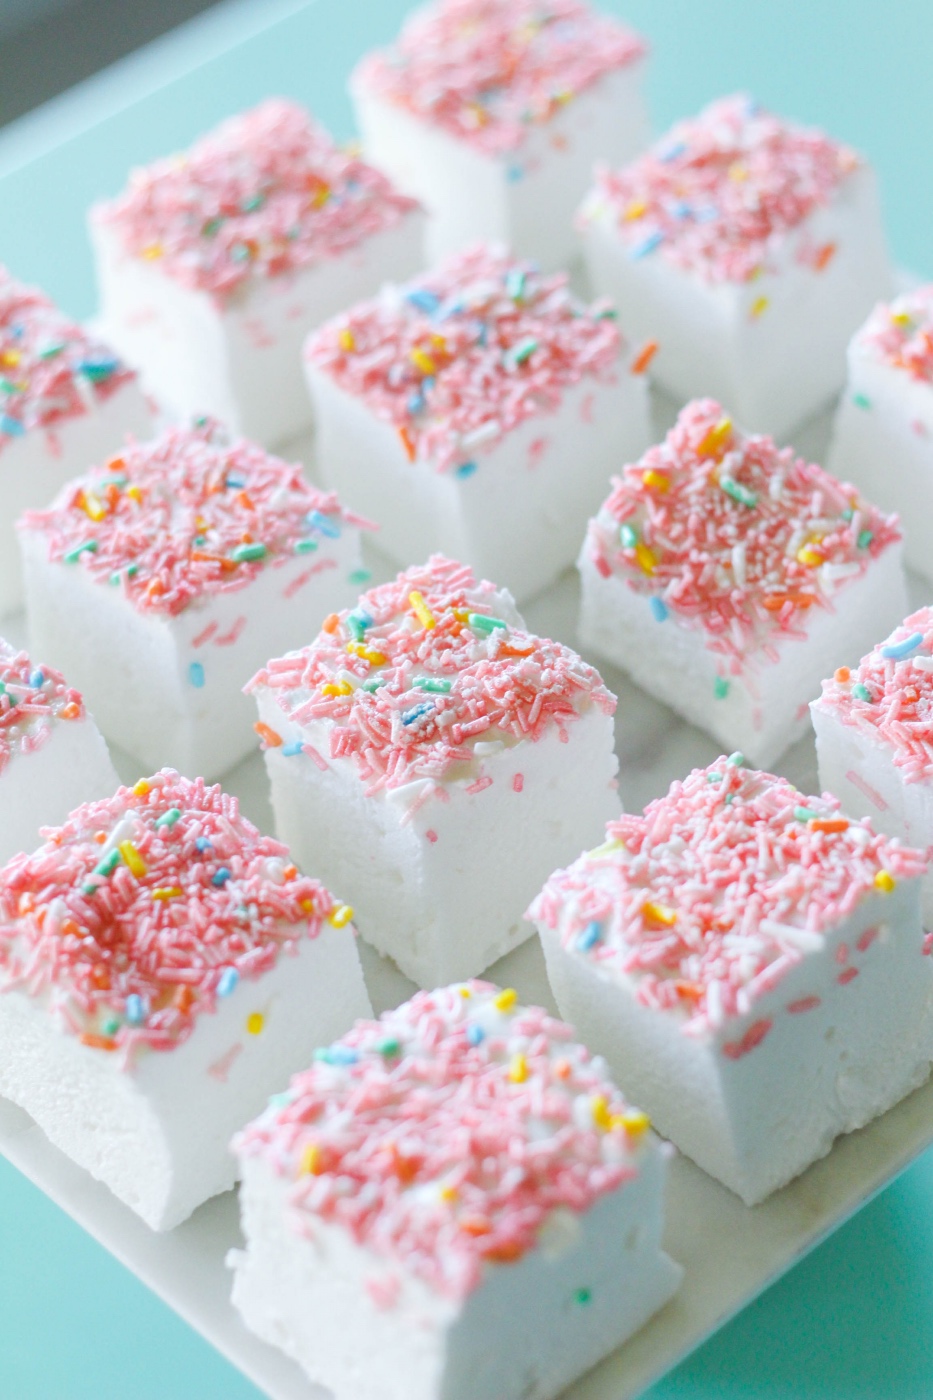 15 Homemade Marshmallow Recipes that are a Perfect Dream